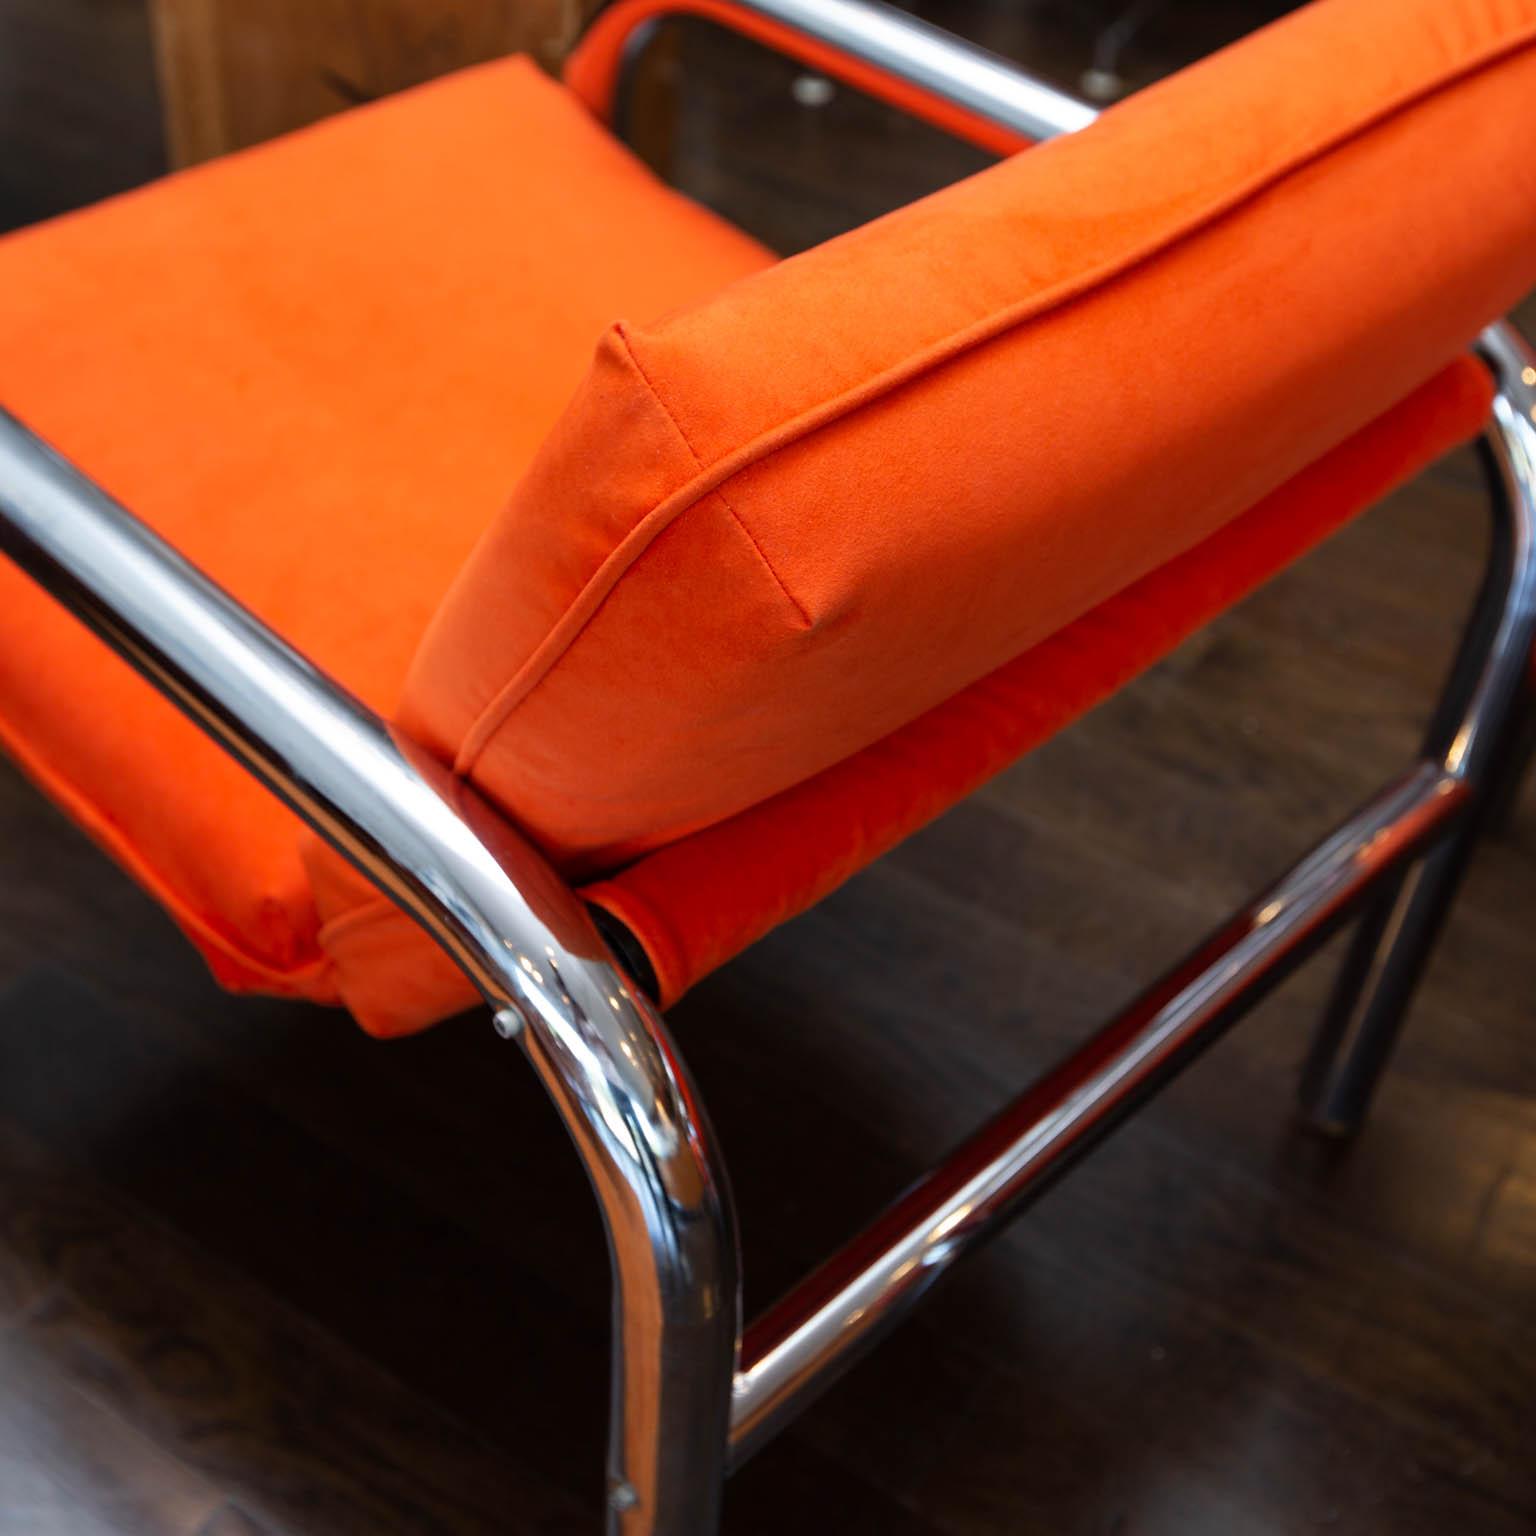 Reupholstered in a burnt orange ultra-suede, these Brady Bunch-era chairs would be great in a MCM themed room.